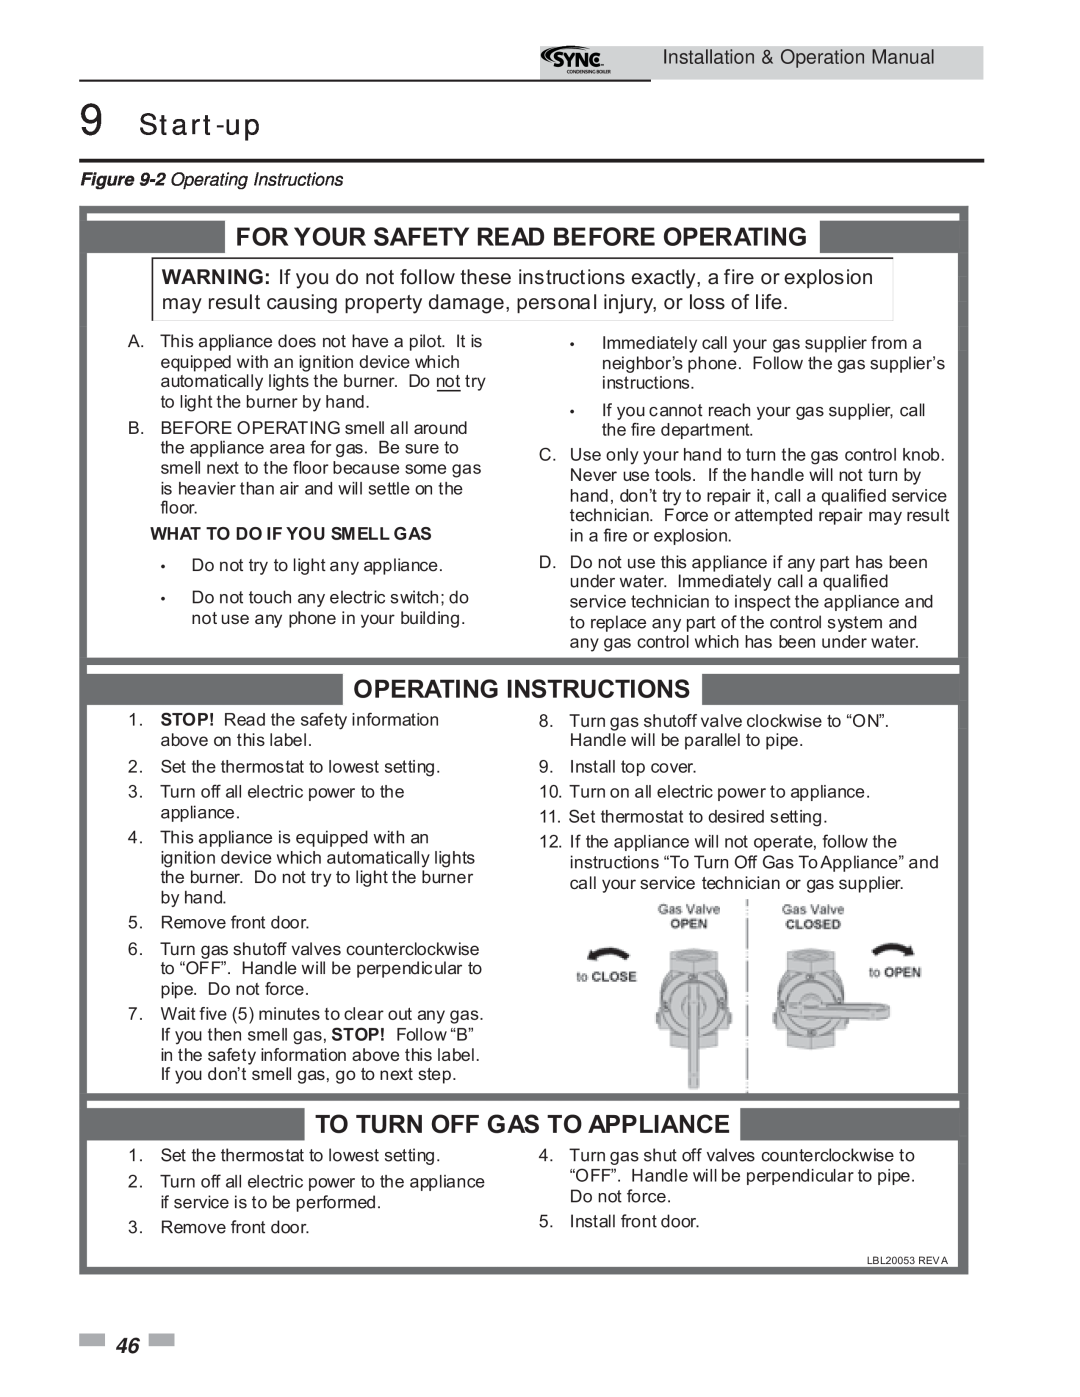 Lochinvar 5 2 Operating Instructions, What To Do If You Smell Gas, Start-up, For Your Safety Read Before Operating 